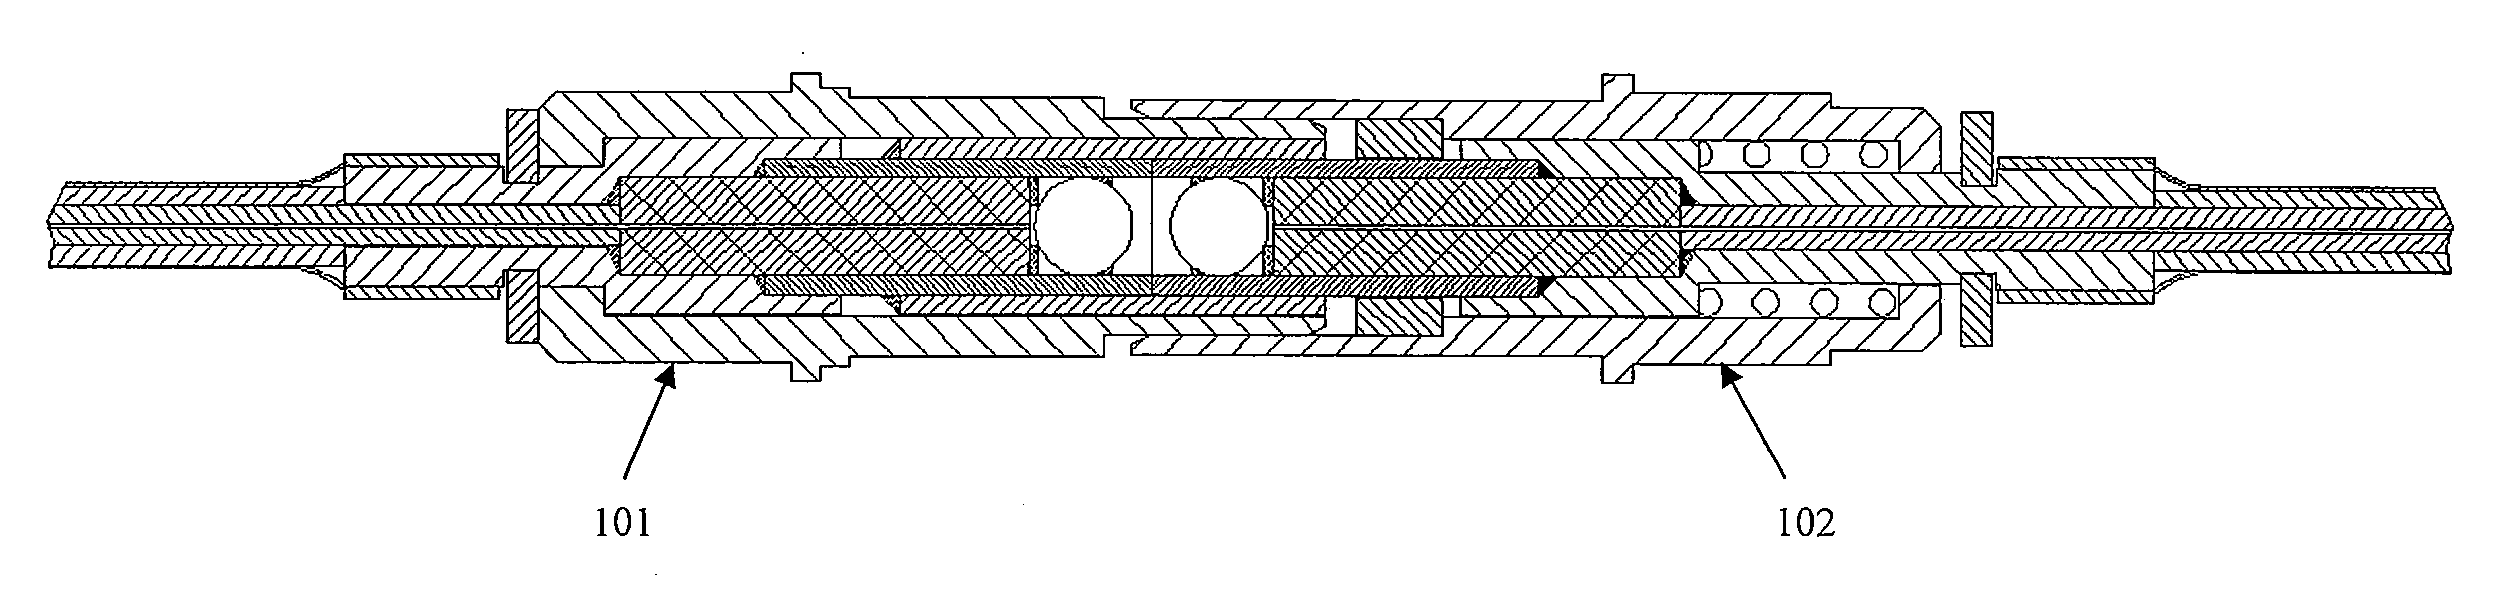 Single-channel expanded beam connector